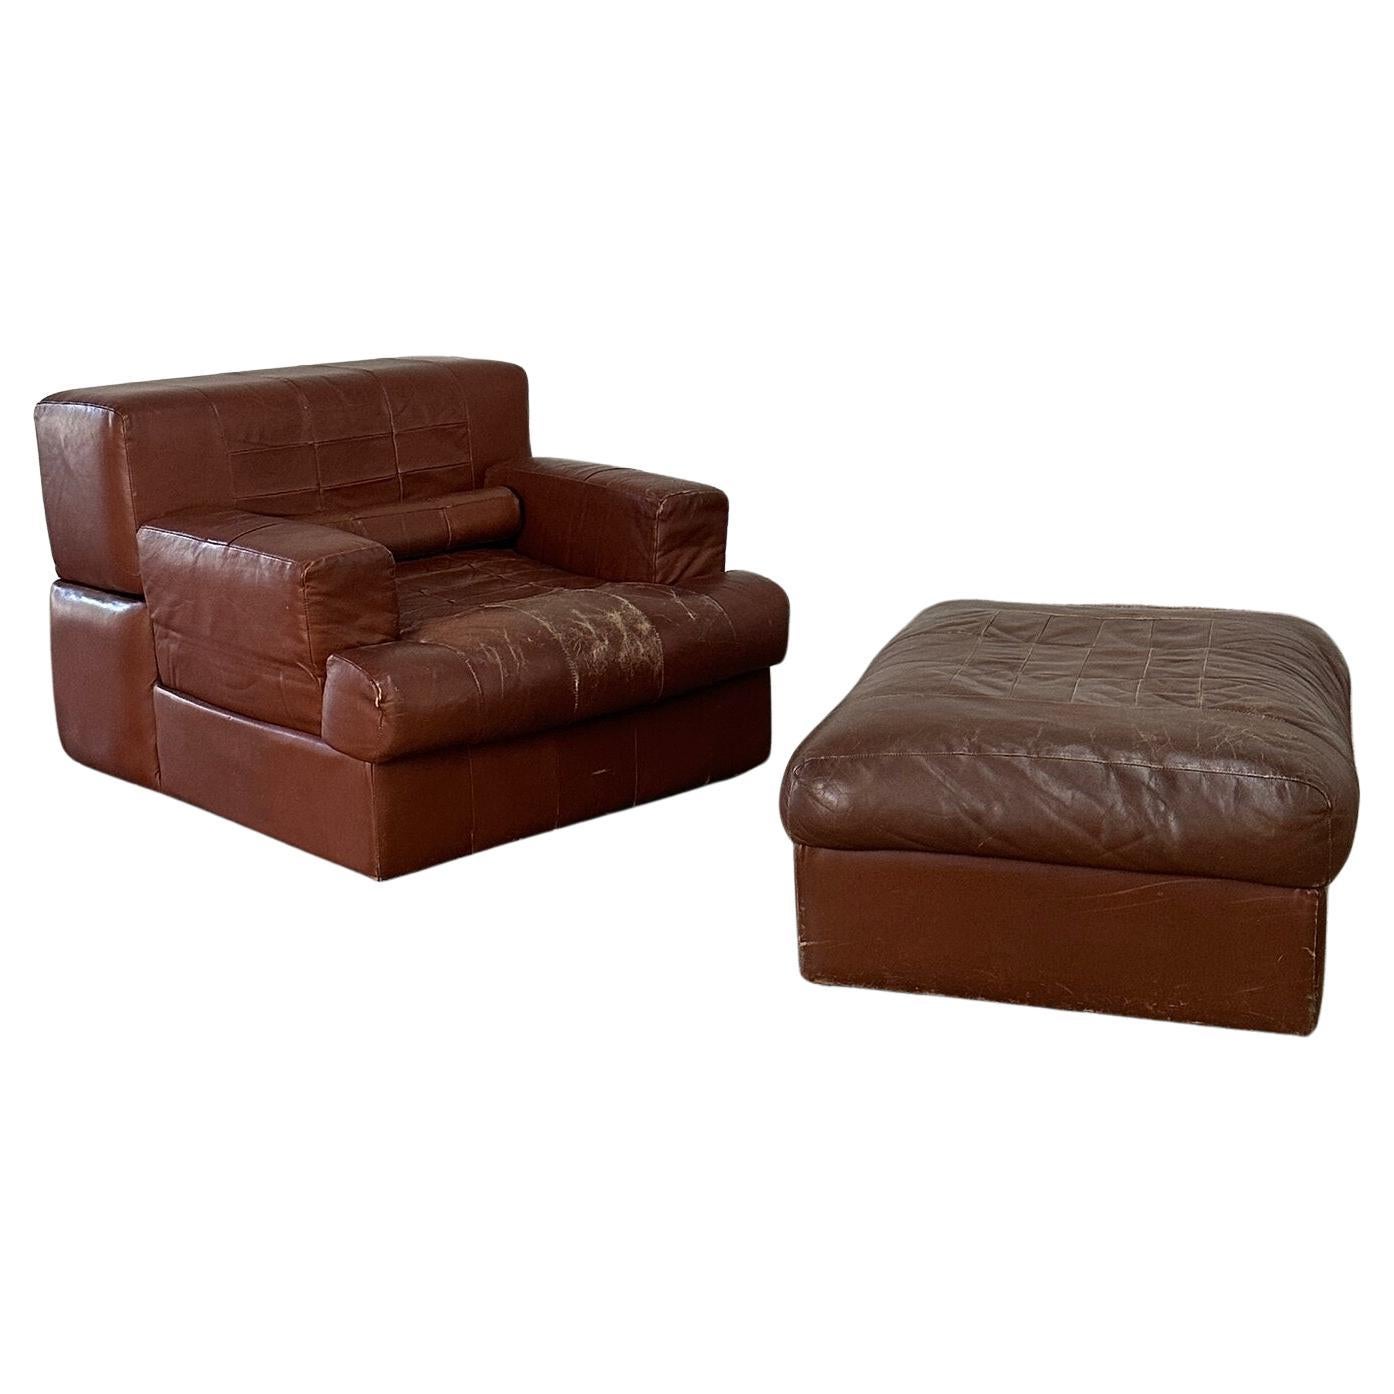 Ajustable Percival Lafer lounge chair and ottoman For Sale